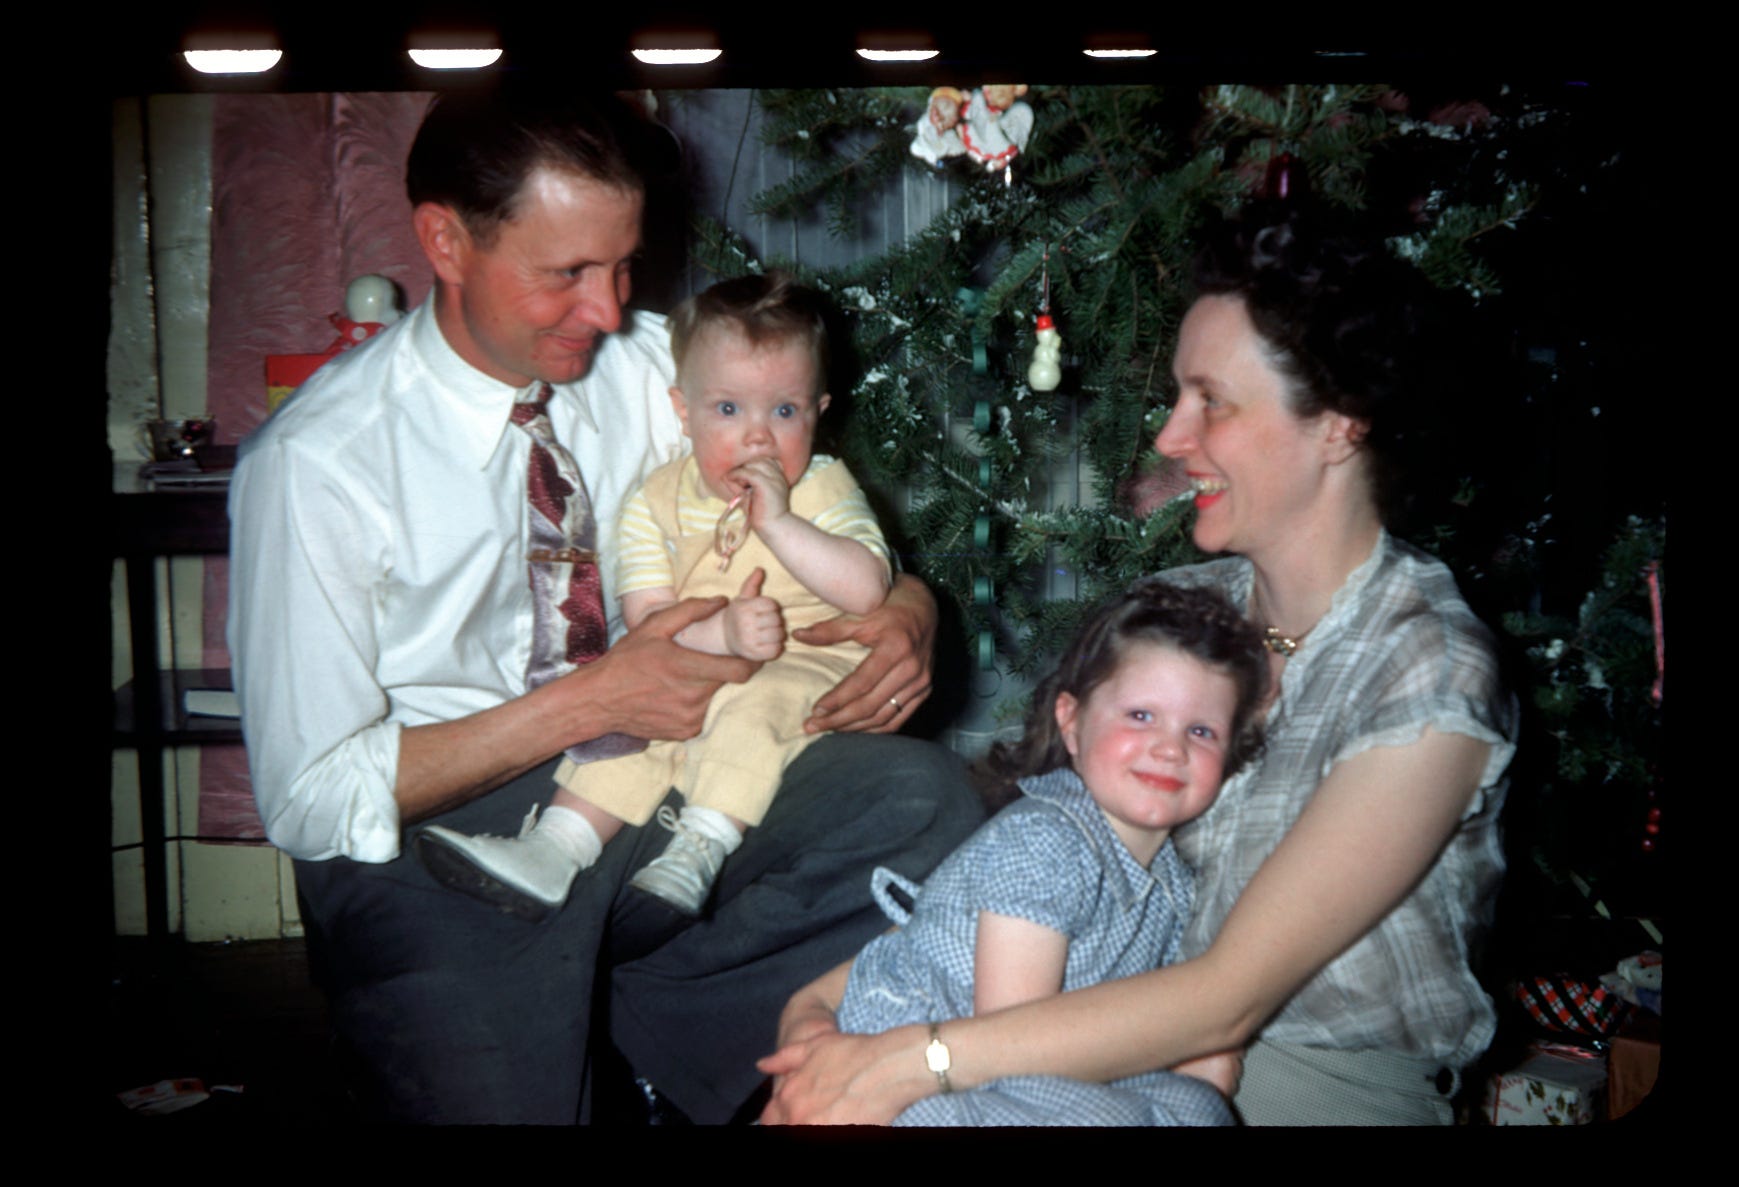 Robert, with son Bob, and Evelyn Birkby, with their daughter, Dulcie Jean, await Santa at Christmas 1950. Evelyn Birkby wrote a  weekly column for Shenandoah newspapers for 70 years before retiring at 100.